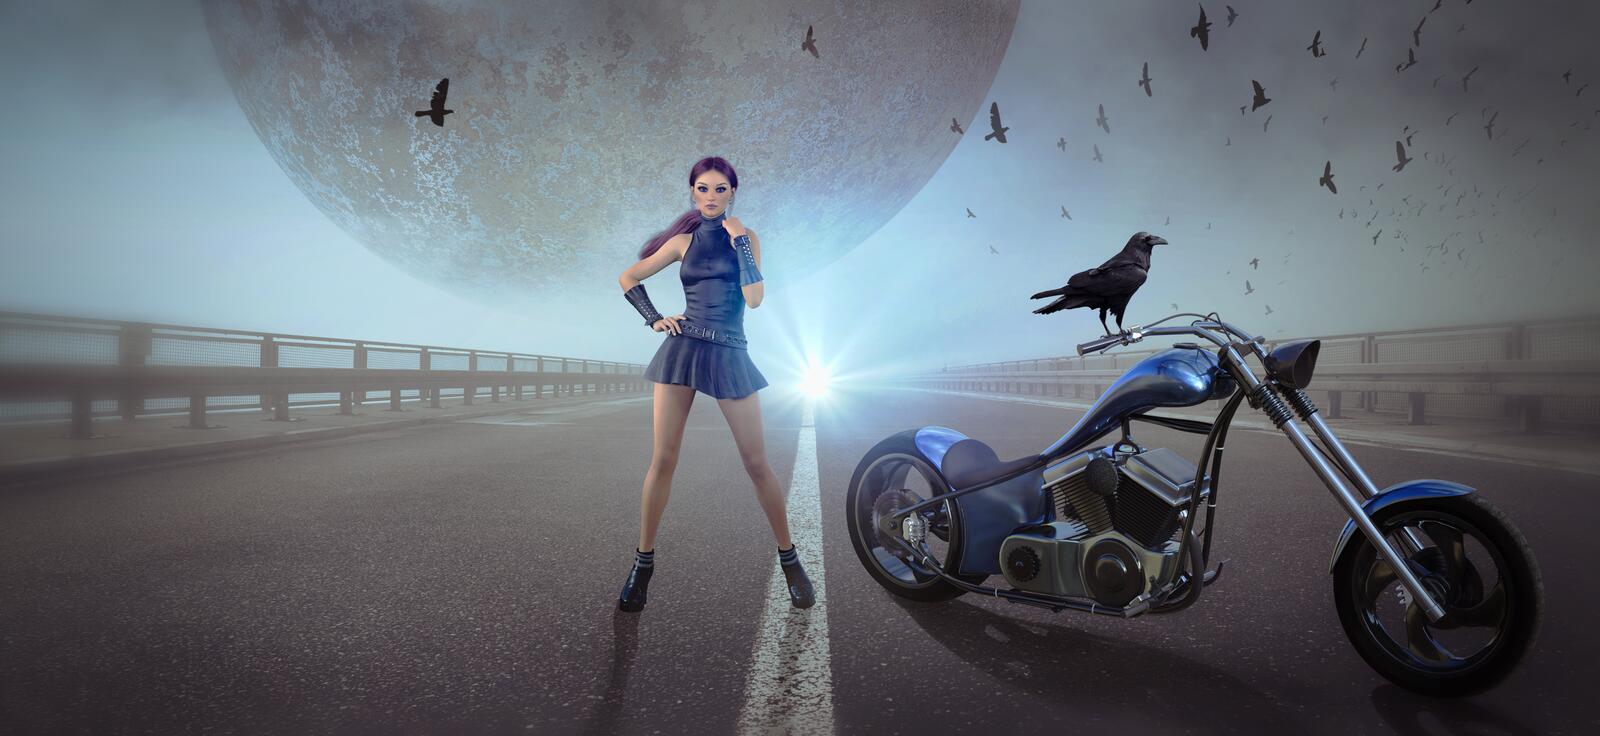 Wallpapers fantasy motorcycle woman on the desktop